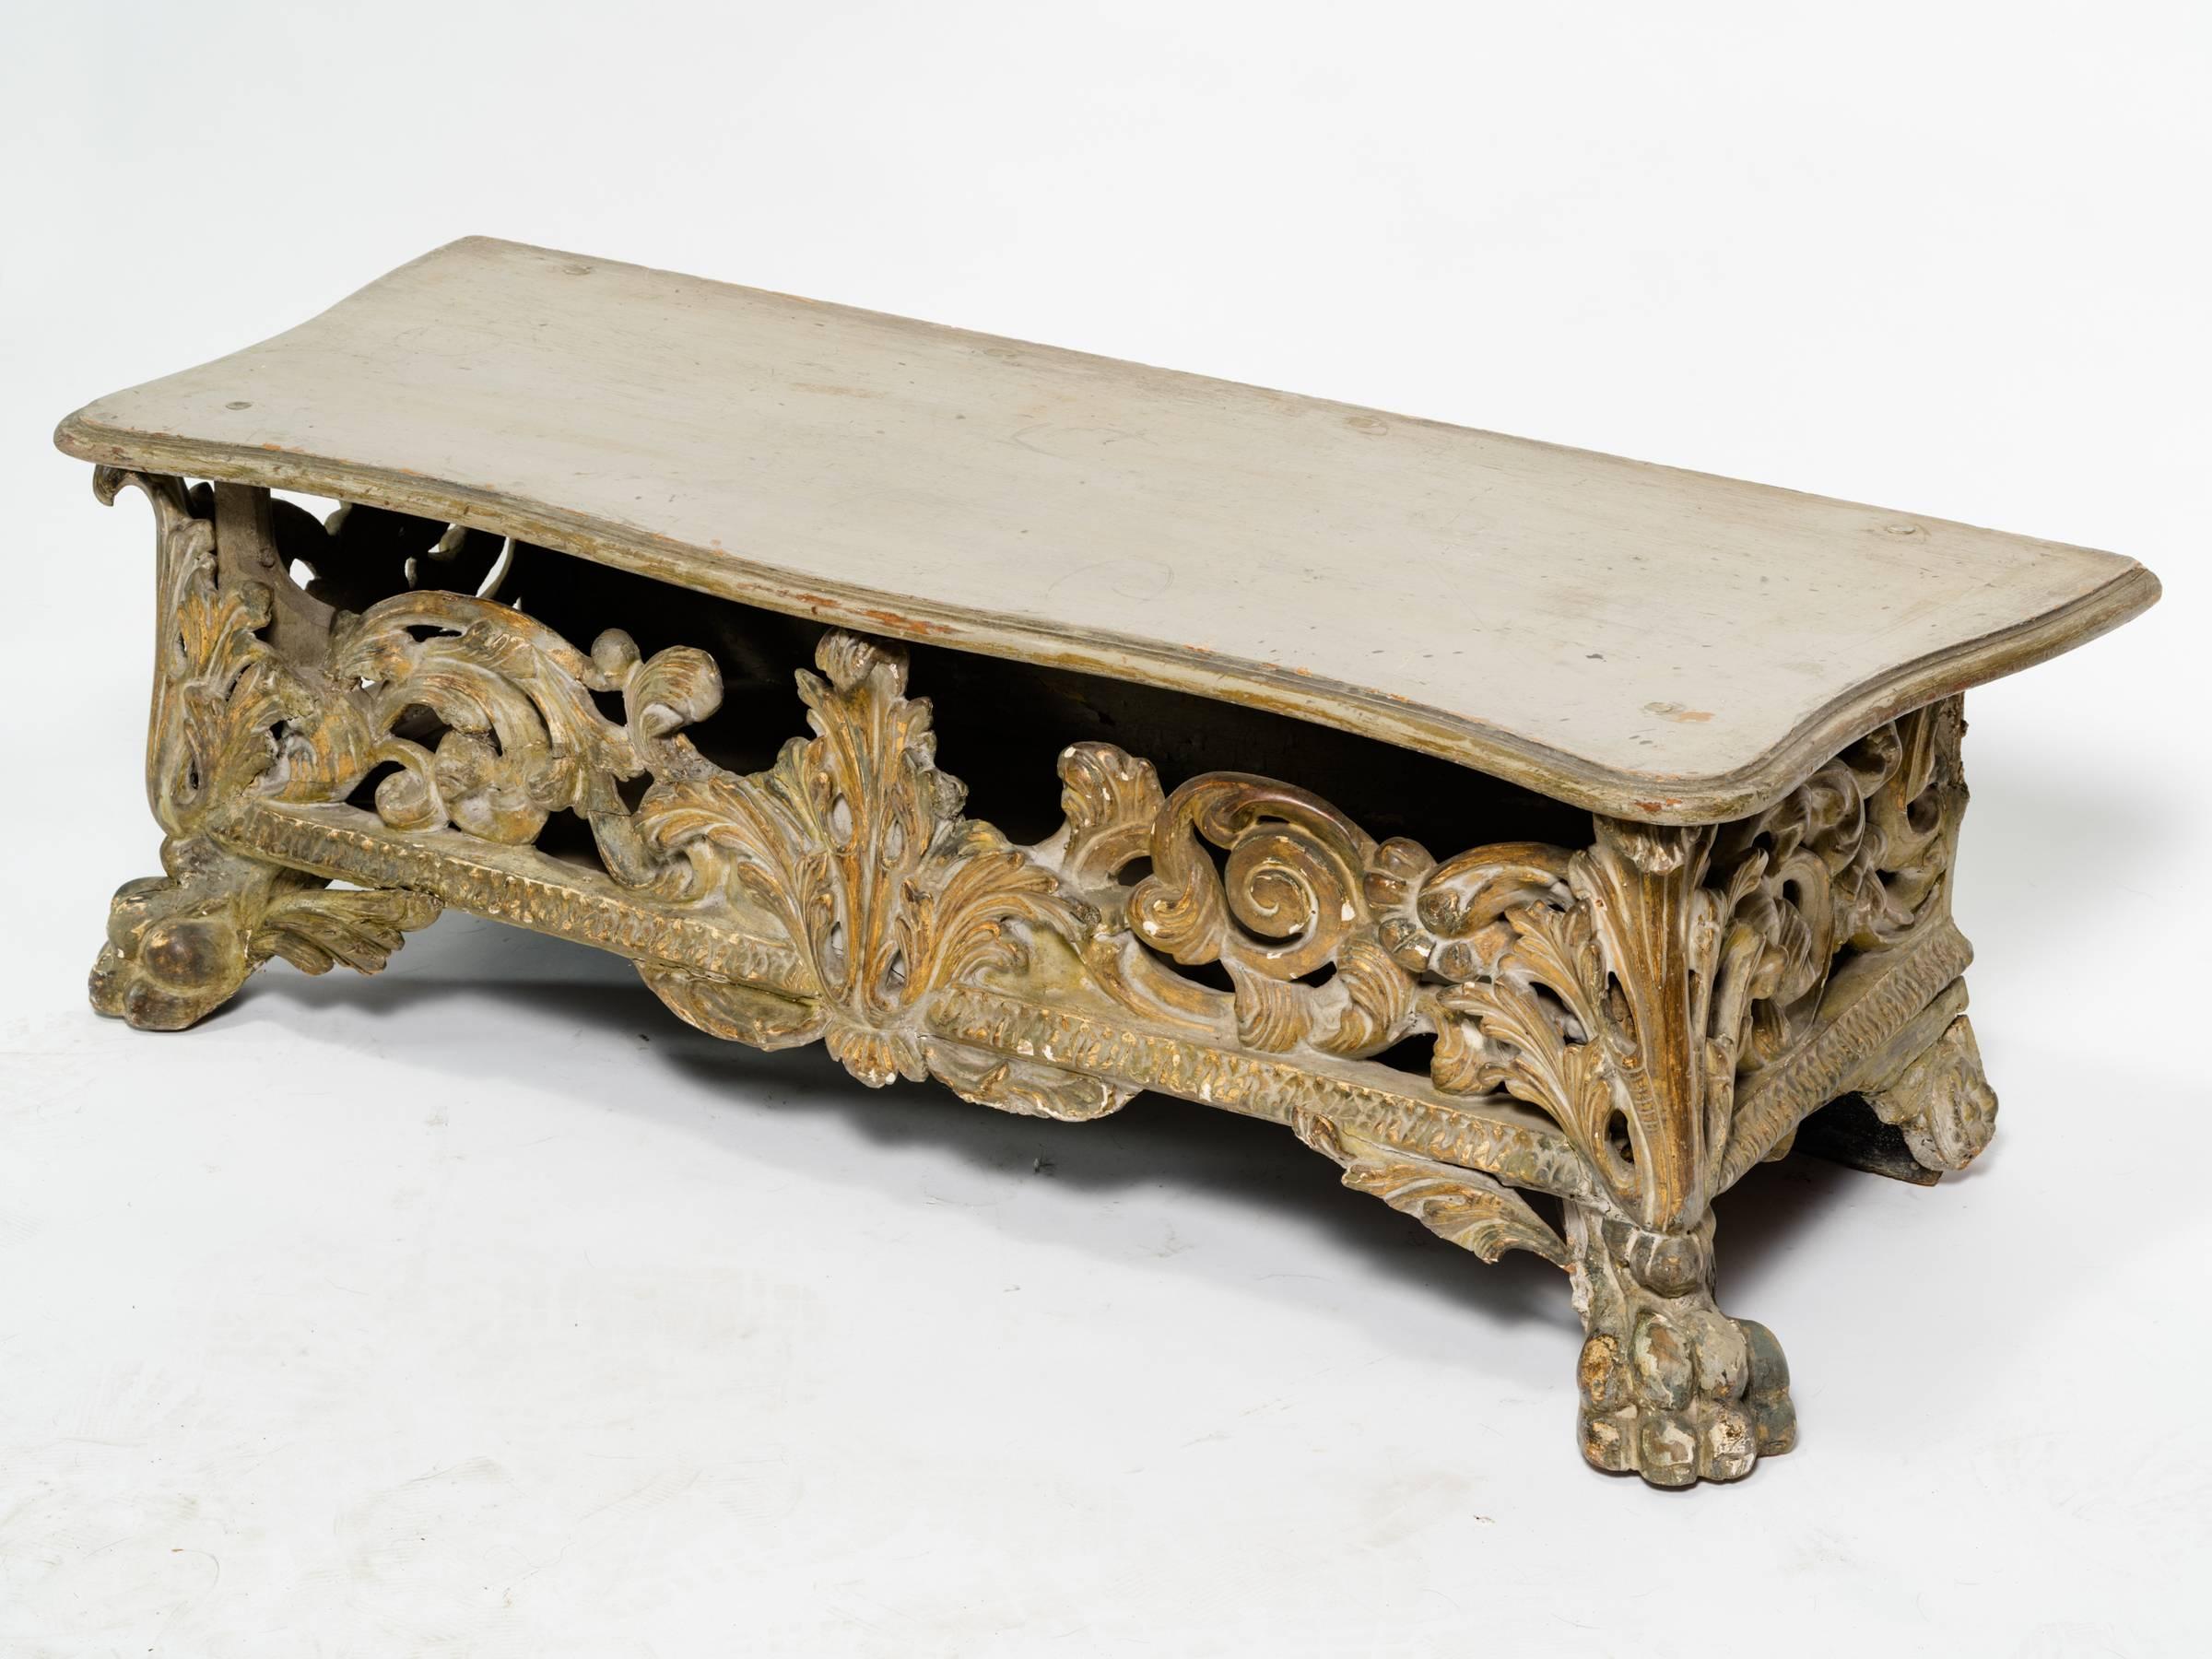 Highly carved wooden bench, circa 1820s